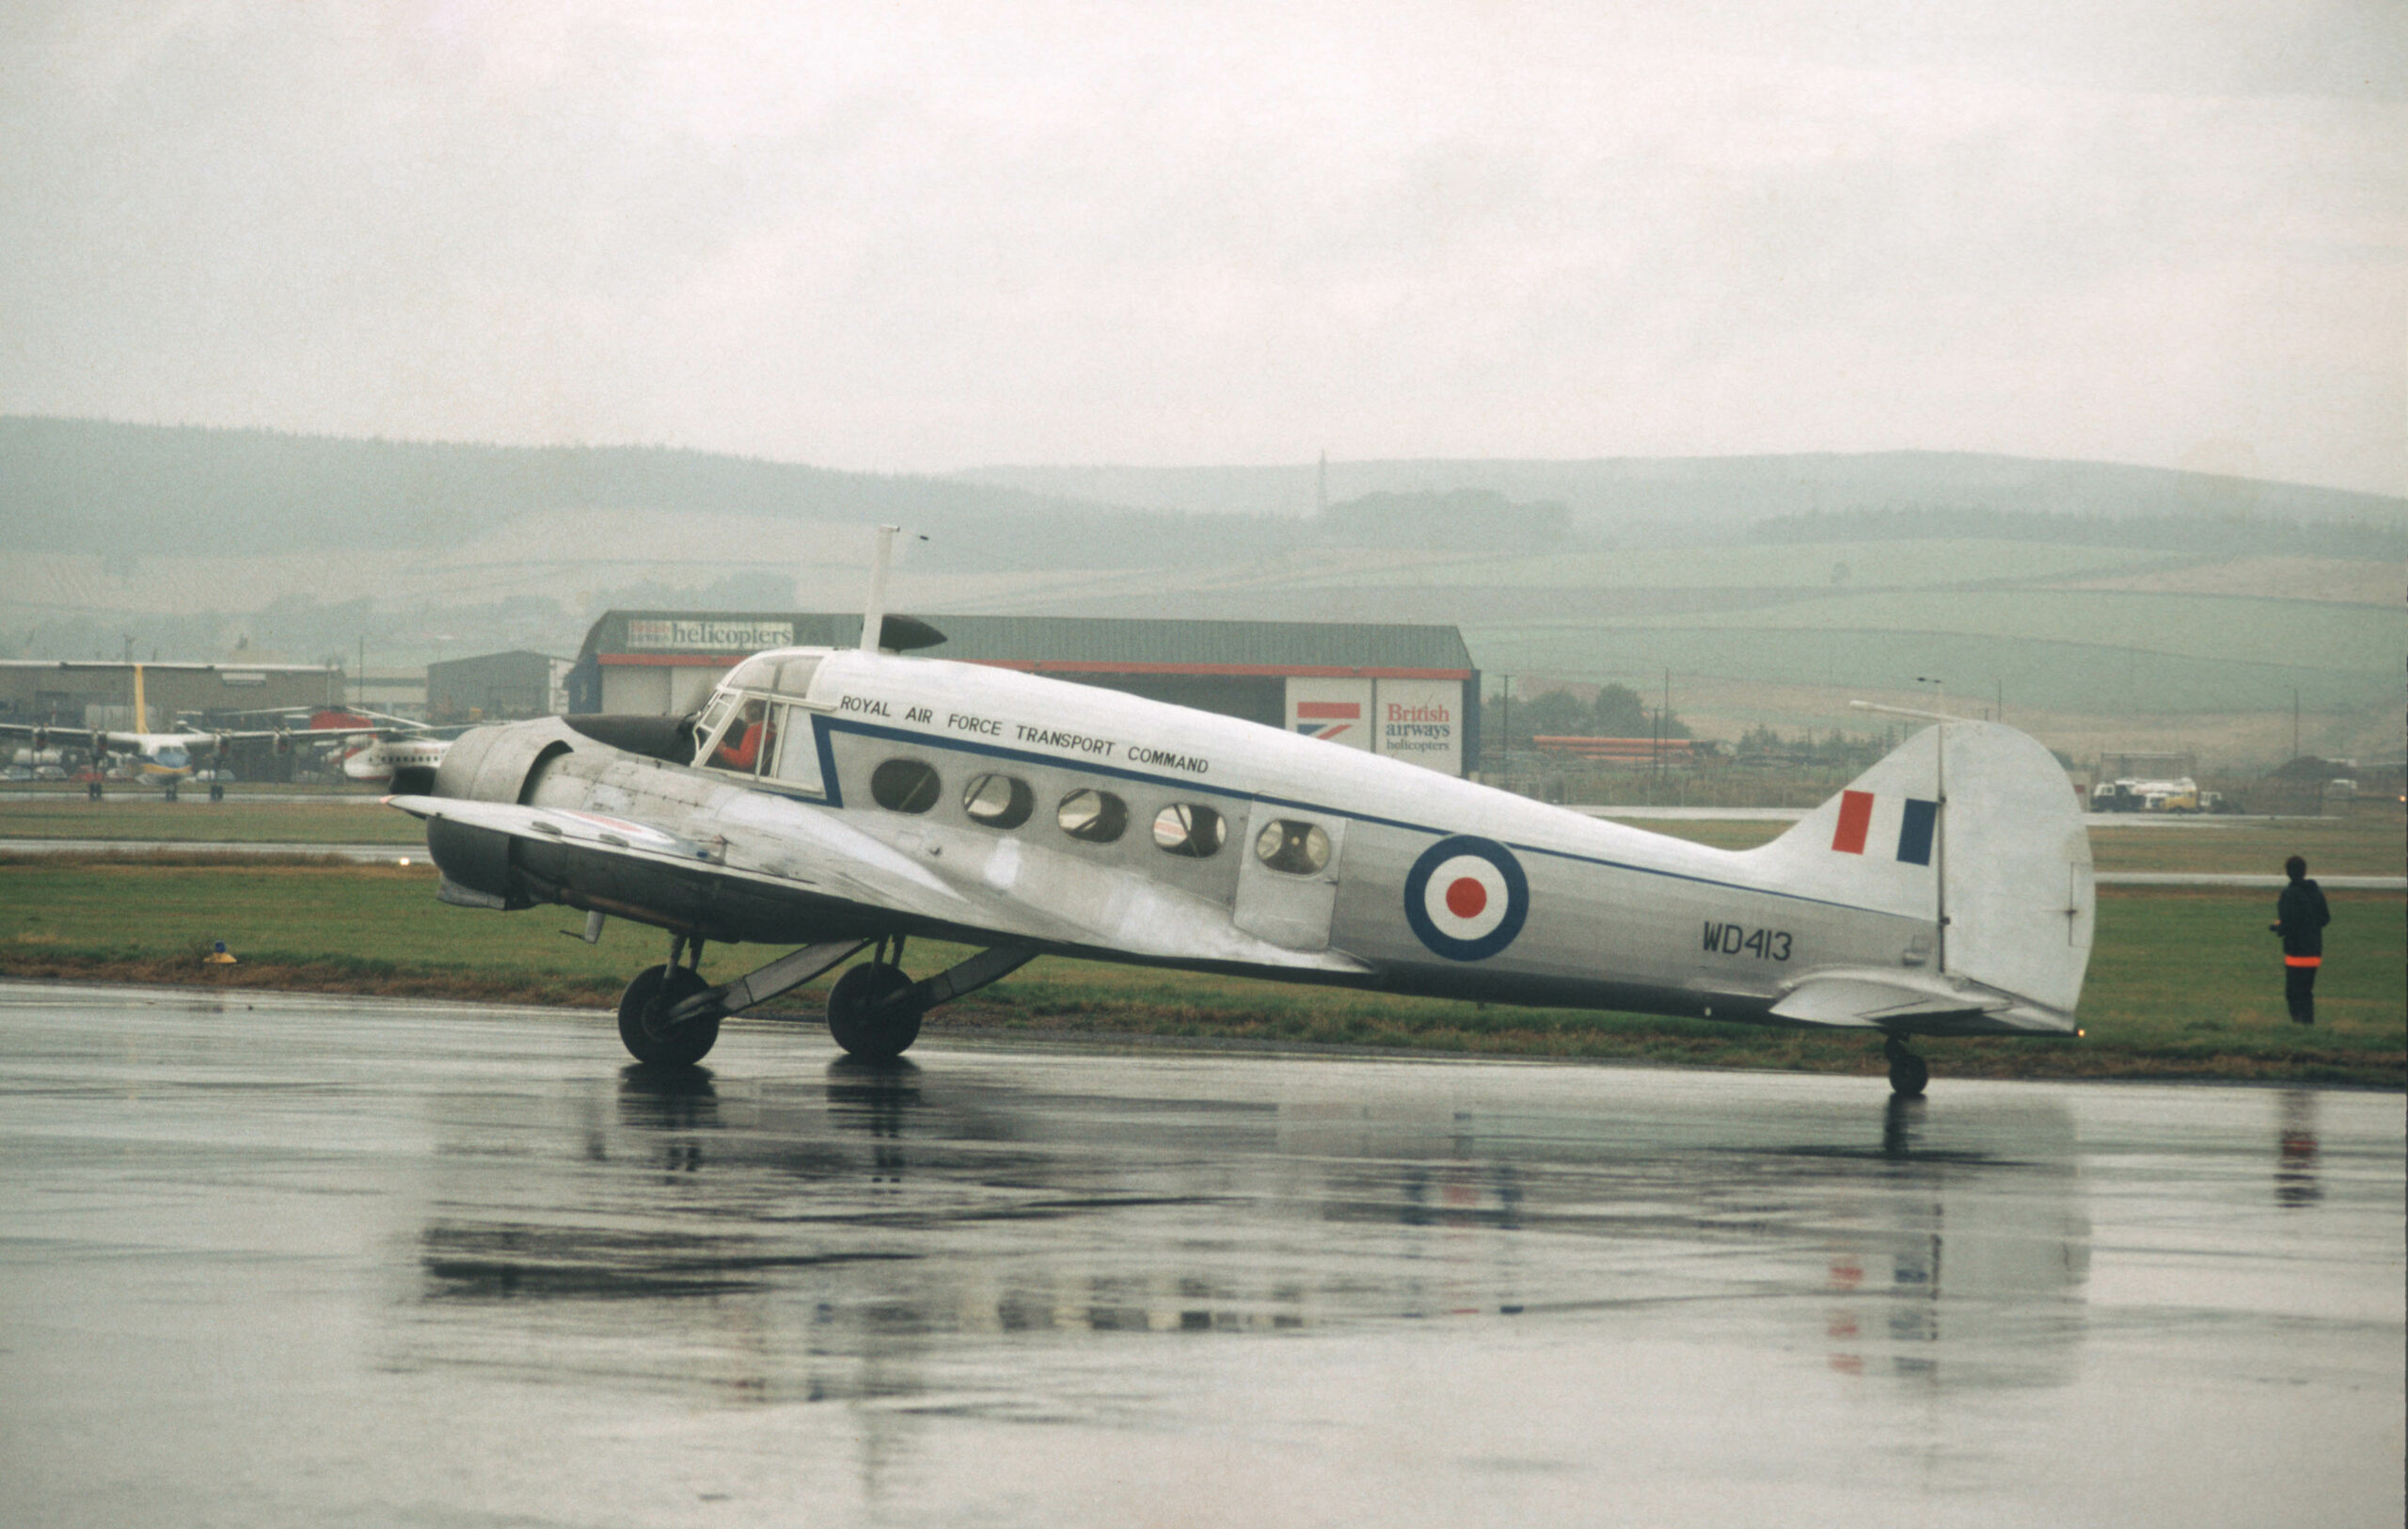 Avro Anson WD413 at Aberdeen Airport